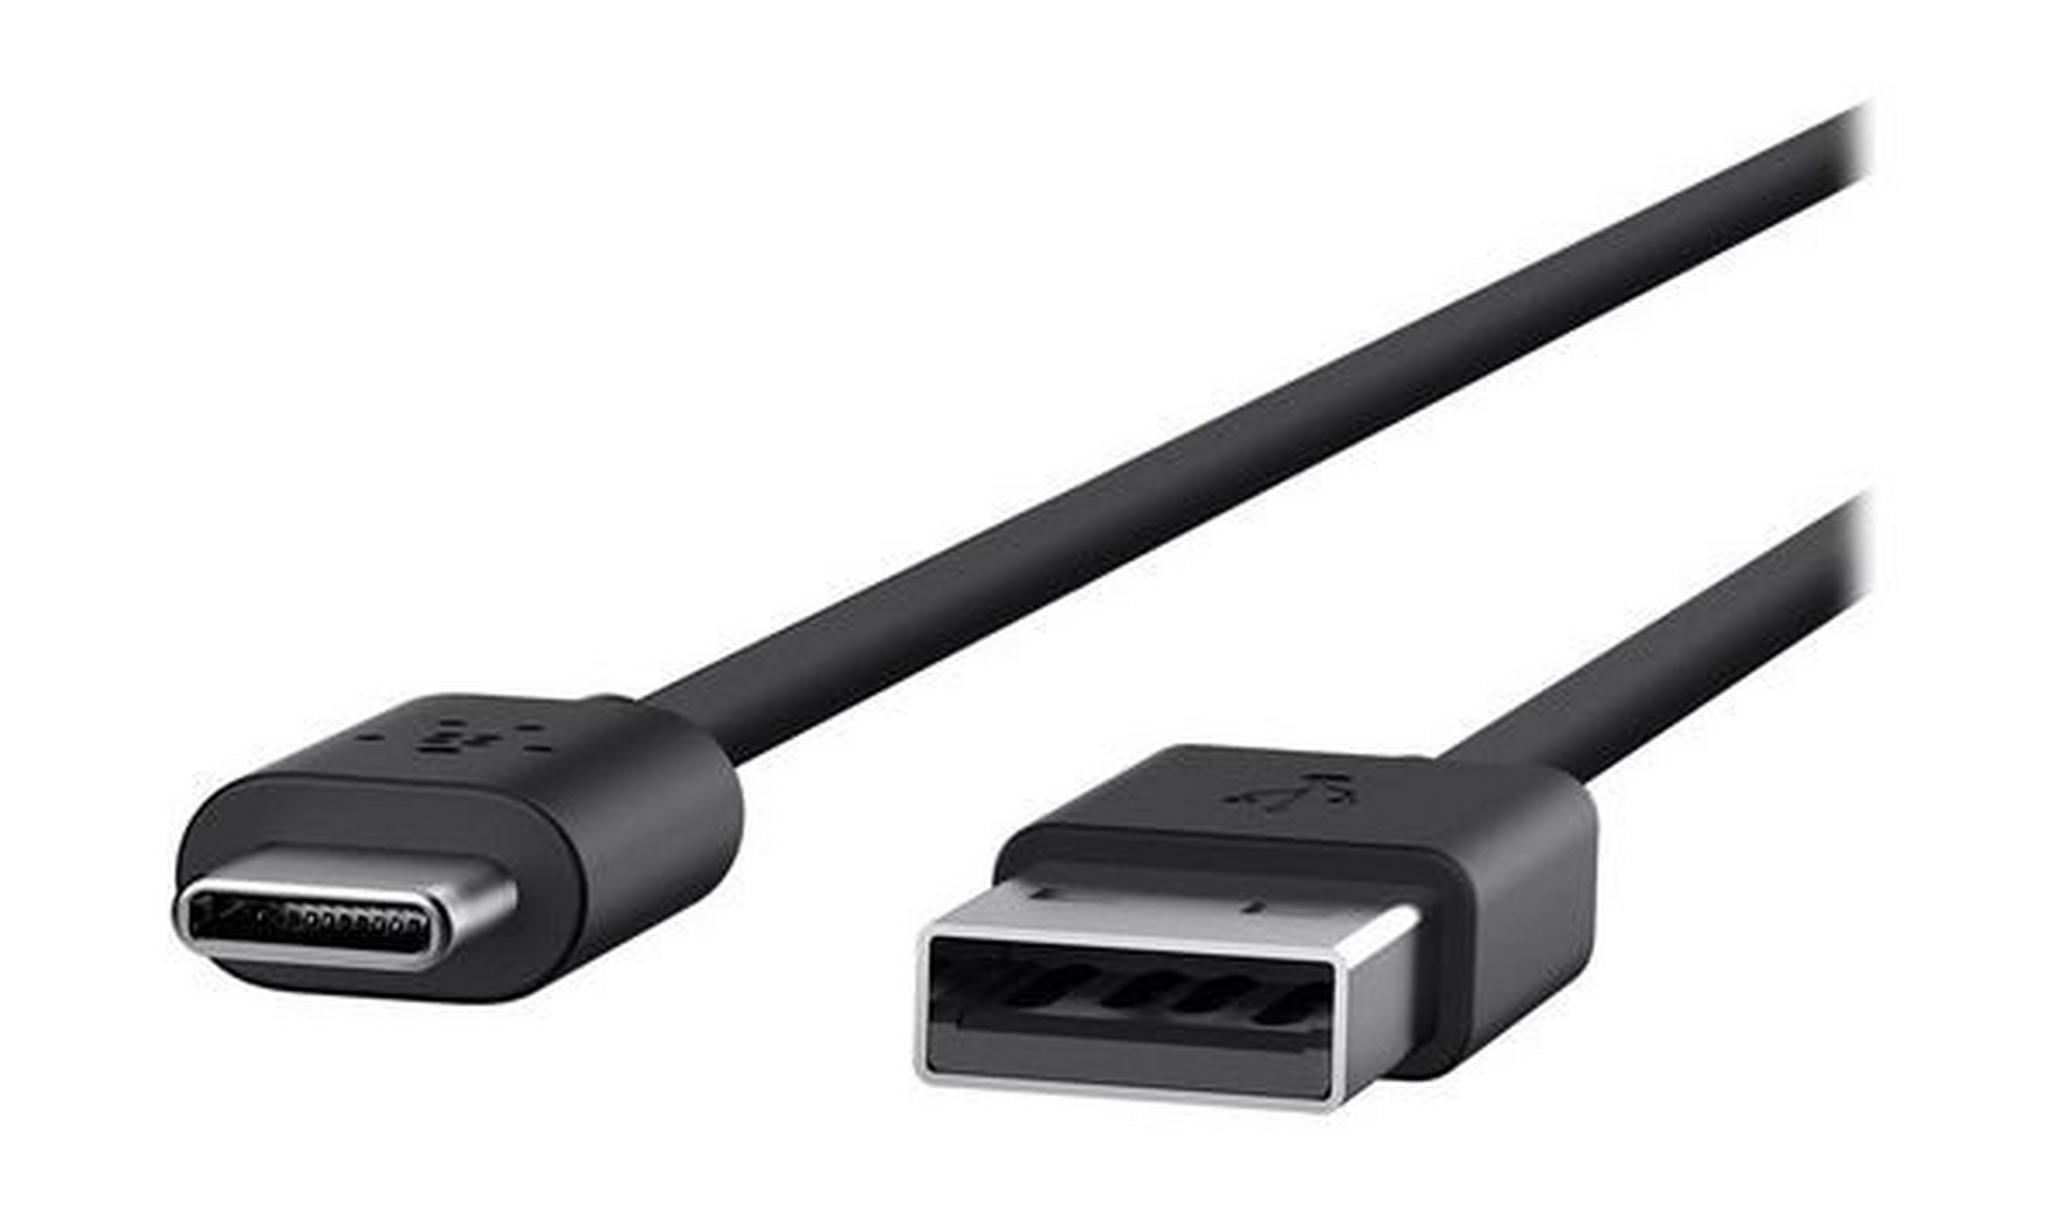 Belkin 2.0 USB-A to USB-C Charge Cable 1.8 M (F2CU032BT06) - Black